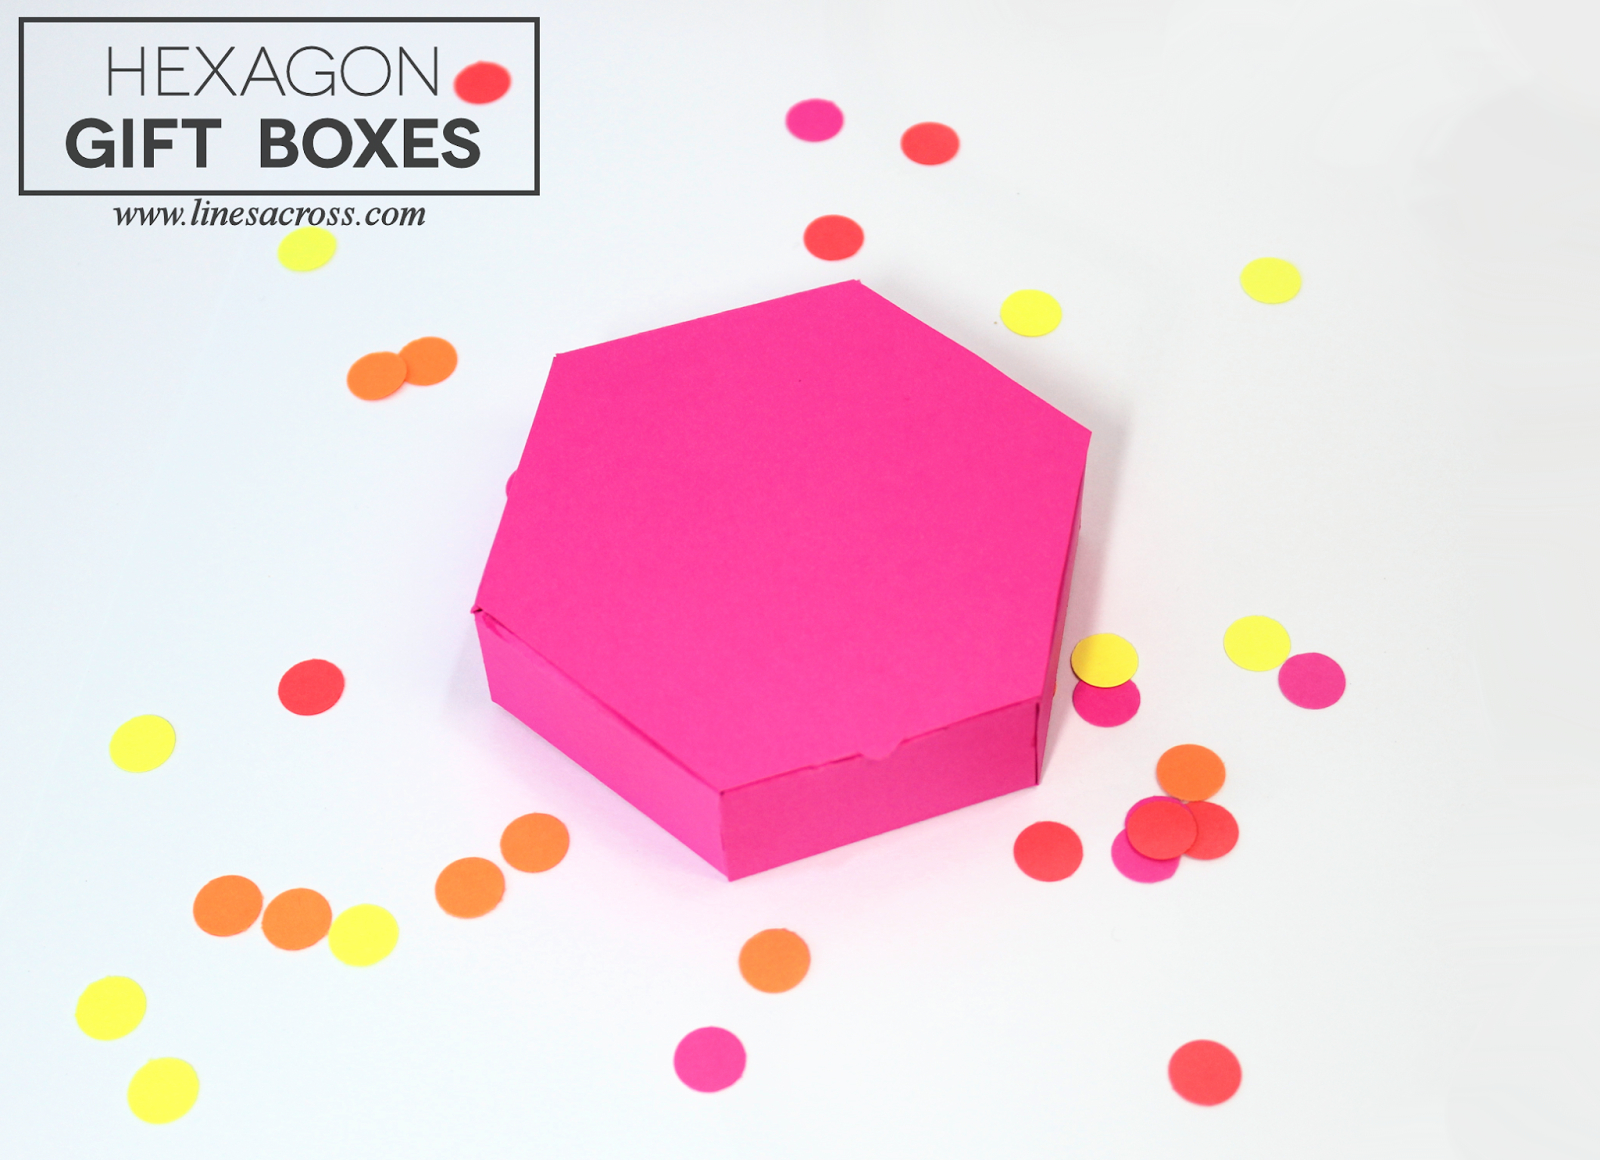 15 Paper Gift Box Templates - Lines Across - Free Printable Gift Boxes